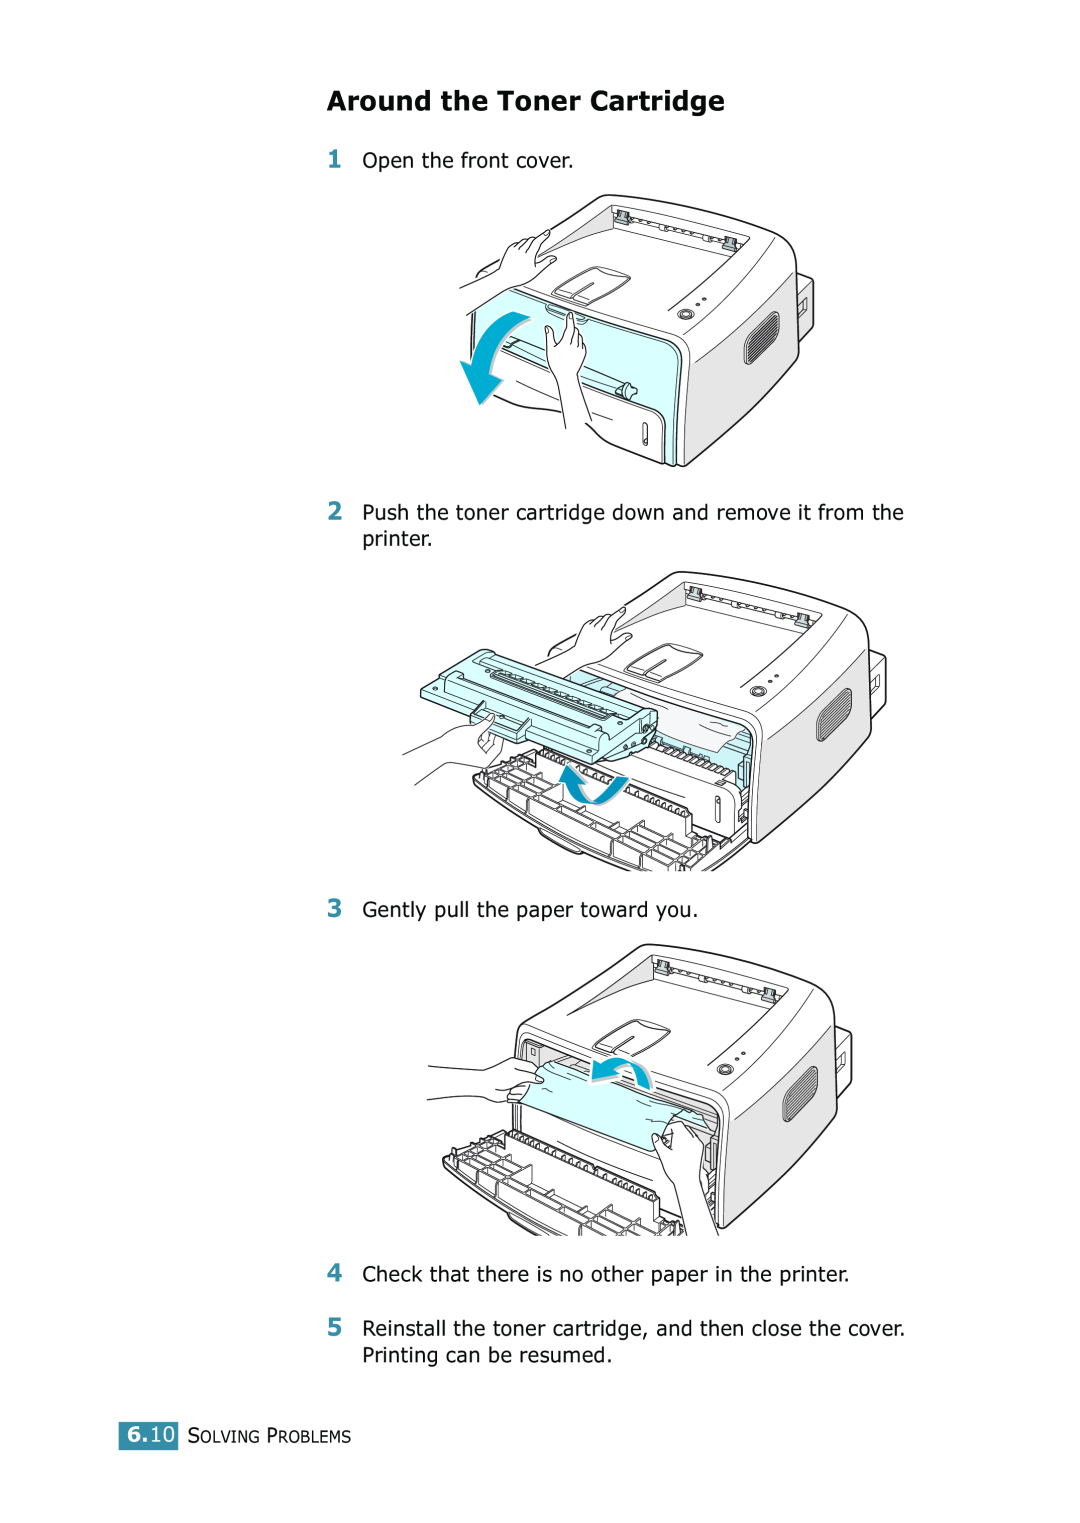 Samsung ML-1520 manual Around the Toner Cartridge, Open the front cover, Gently pull the paper toward you, Solving Problems 